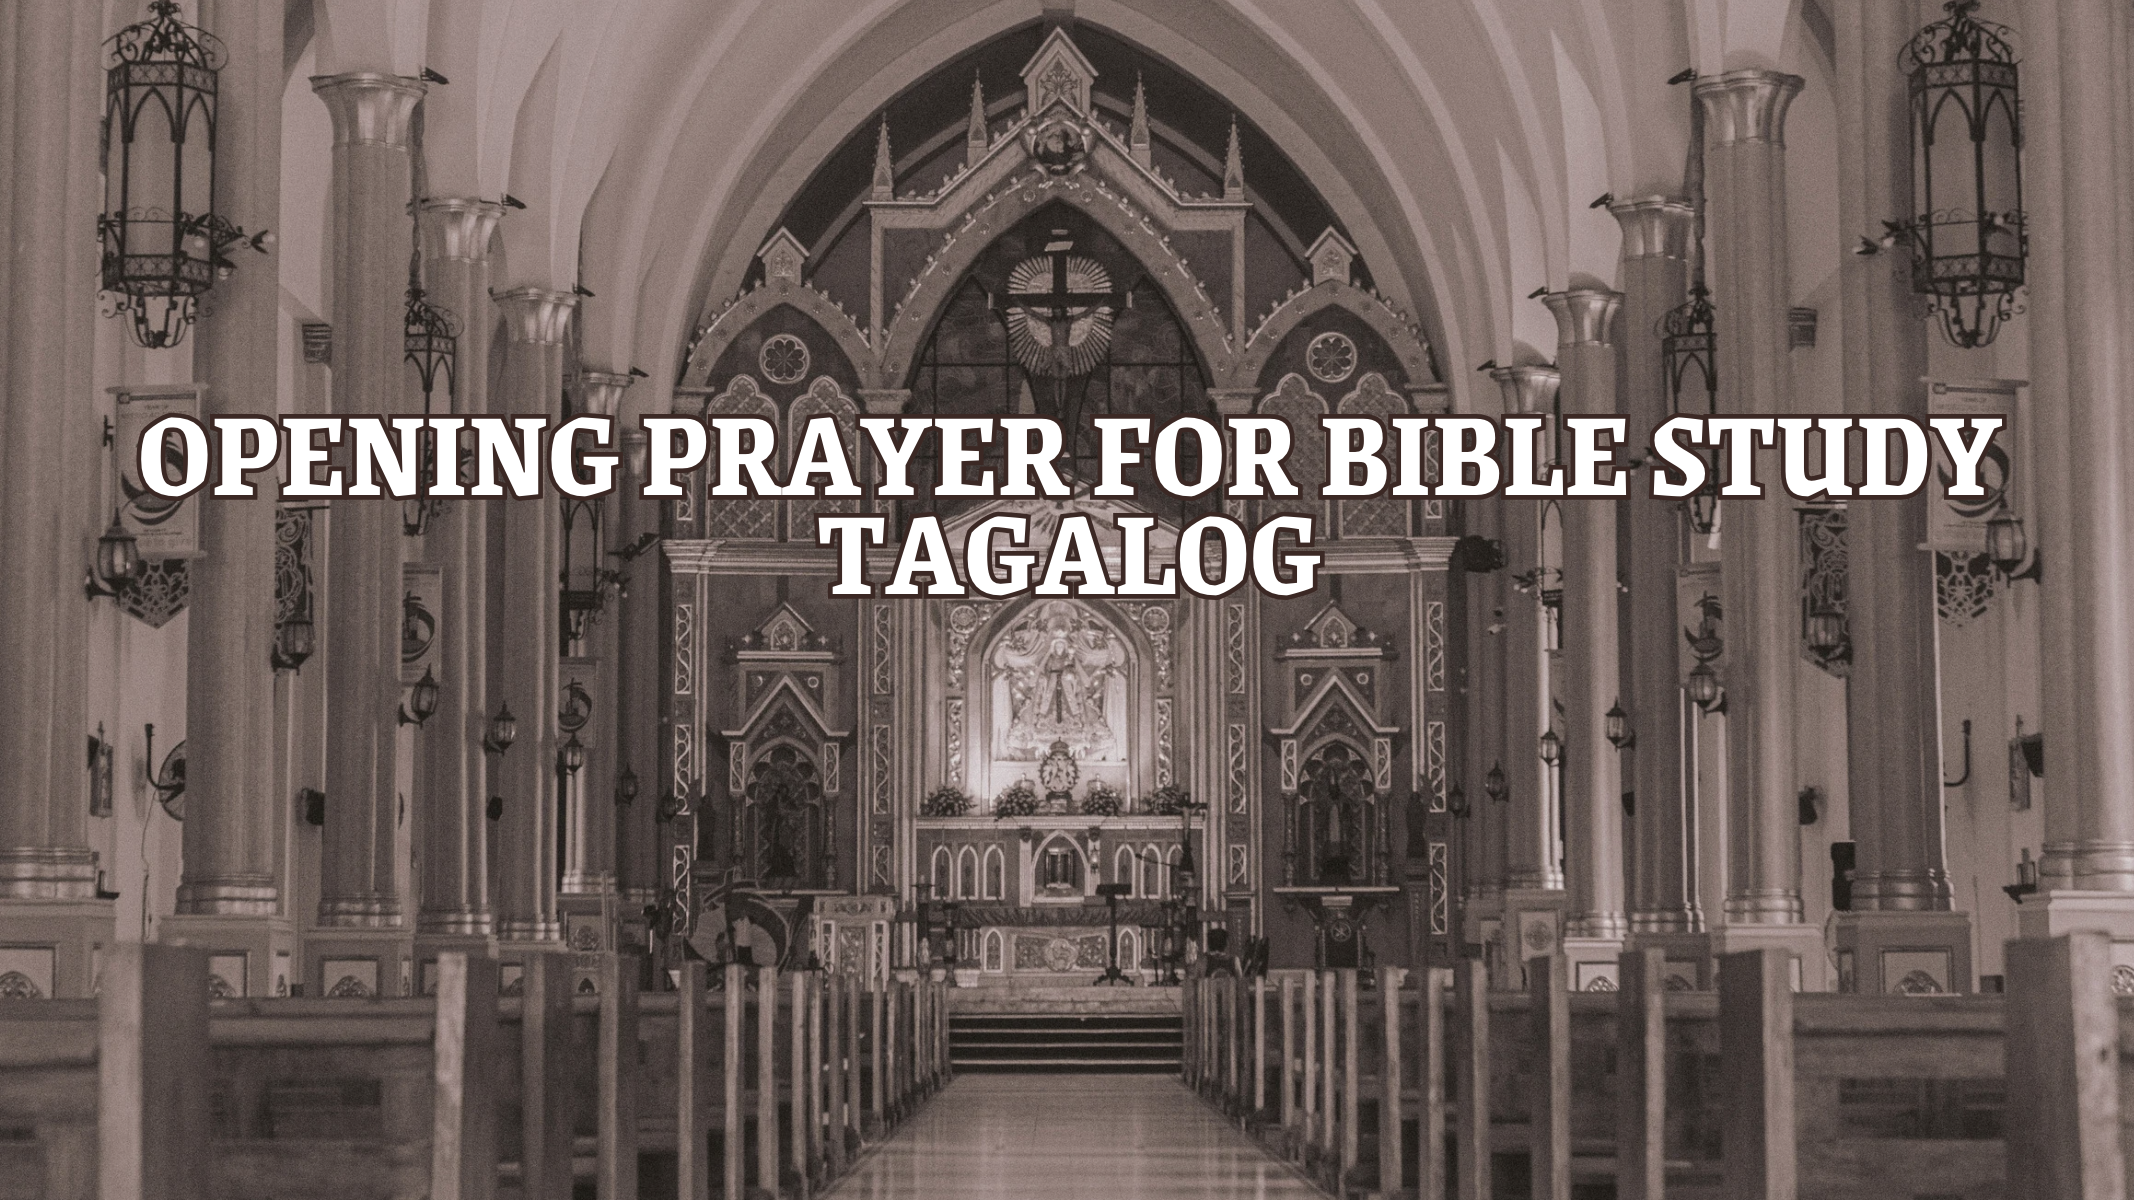 Opening Prayer for Bible Study Tagalog